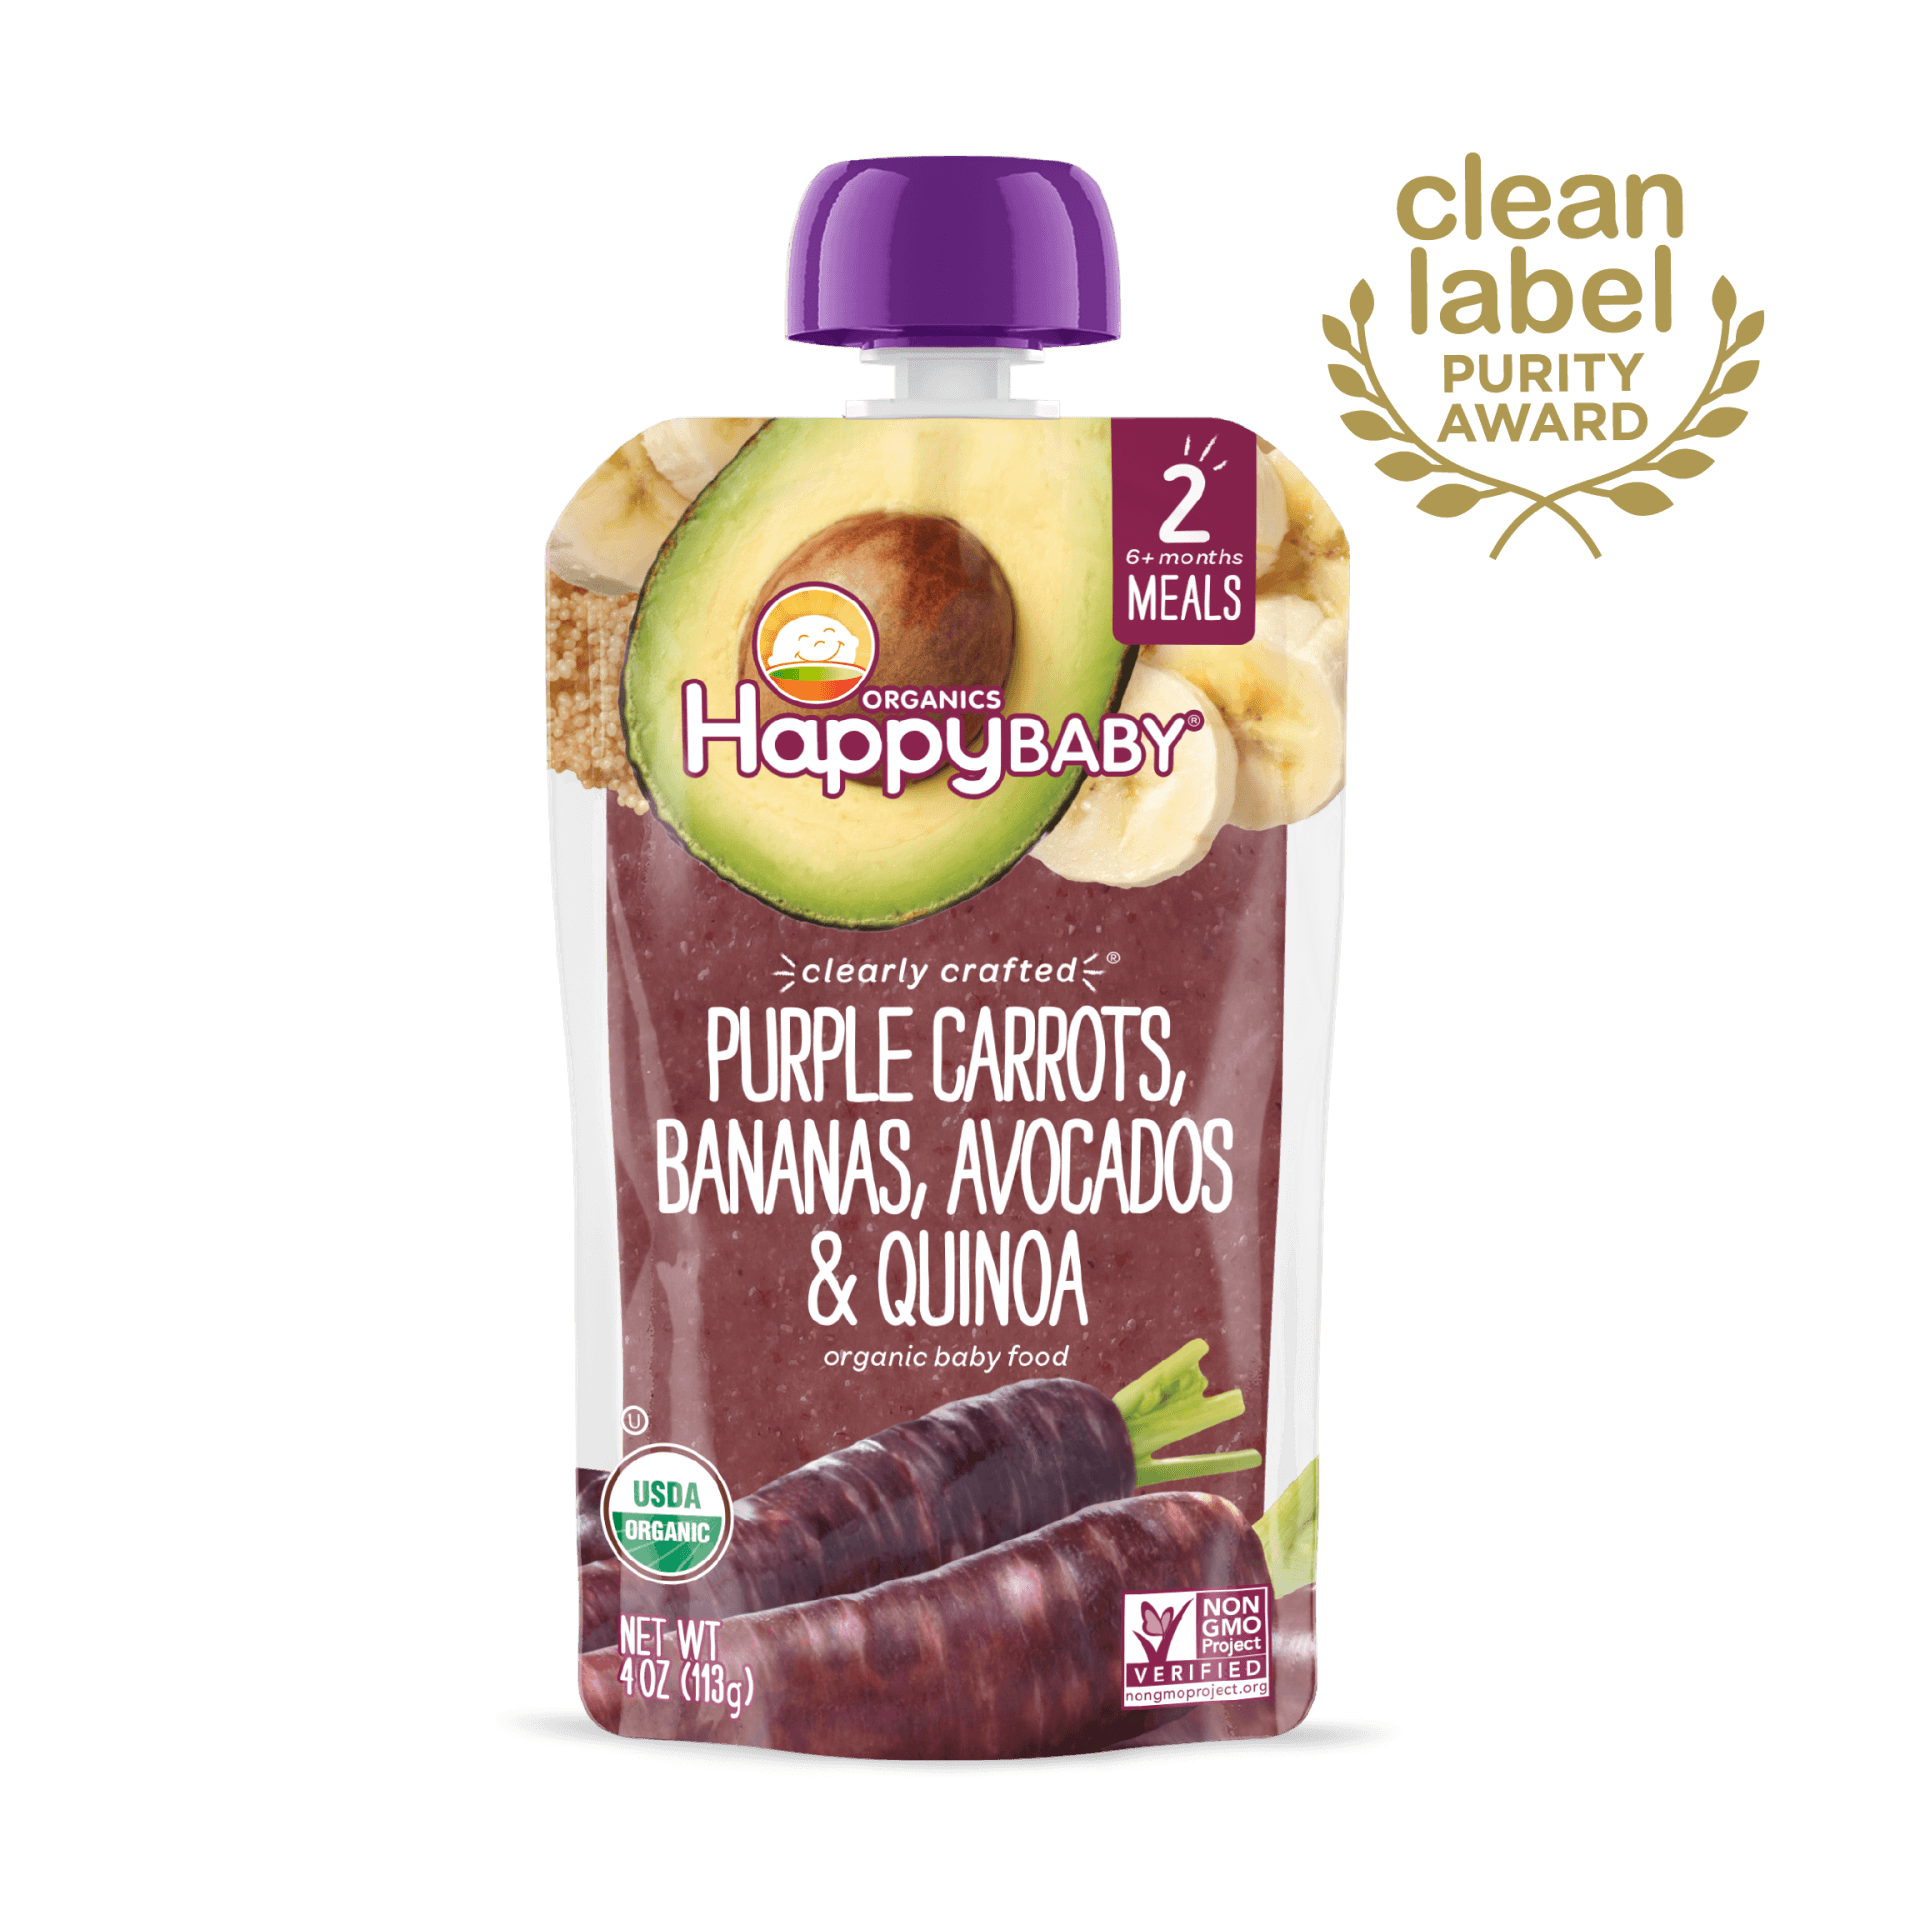 Happy Baby S2 - Clearly Crafted Purple Carrots, Bananas, Avocados & Quinoa 4Oz pouch 16 units per case 4.0 oz